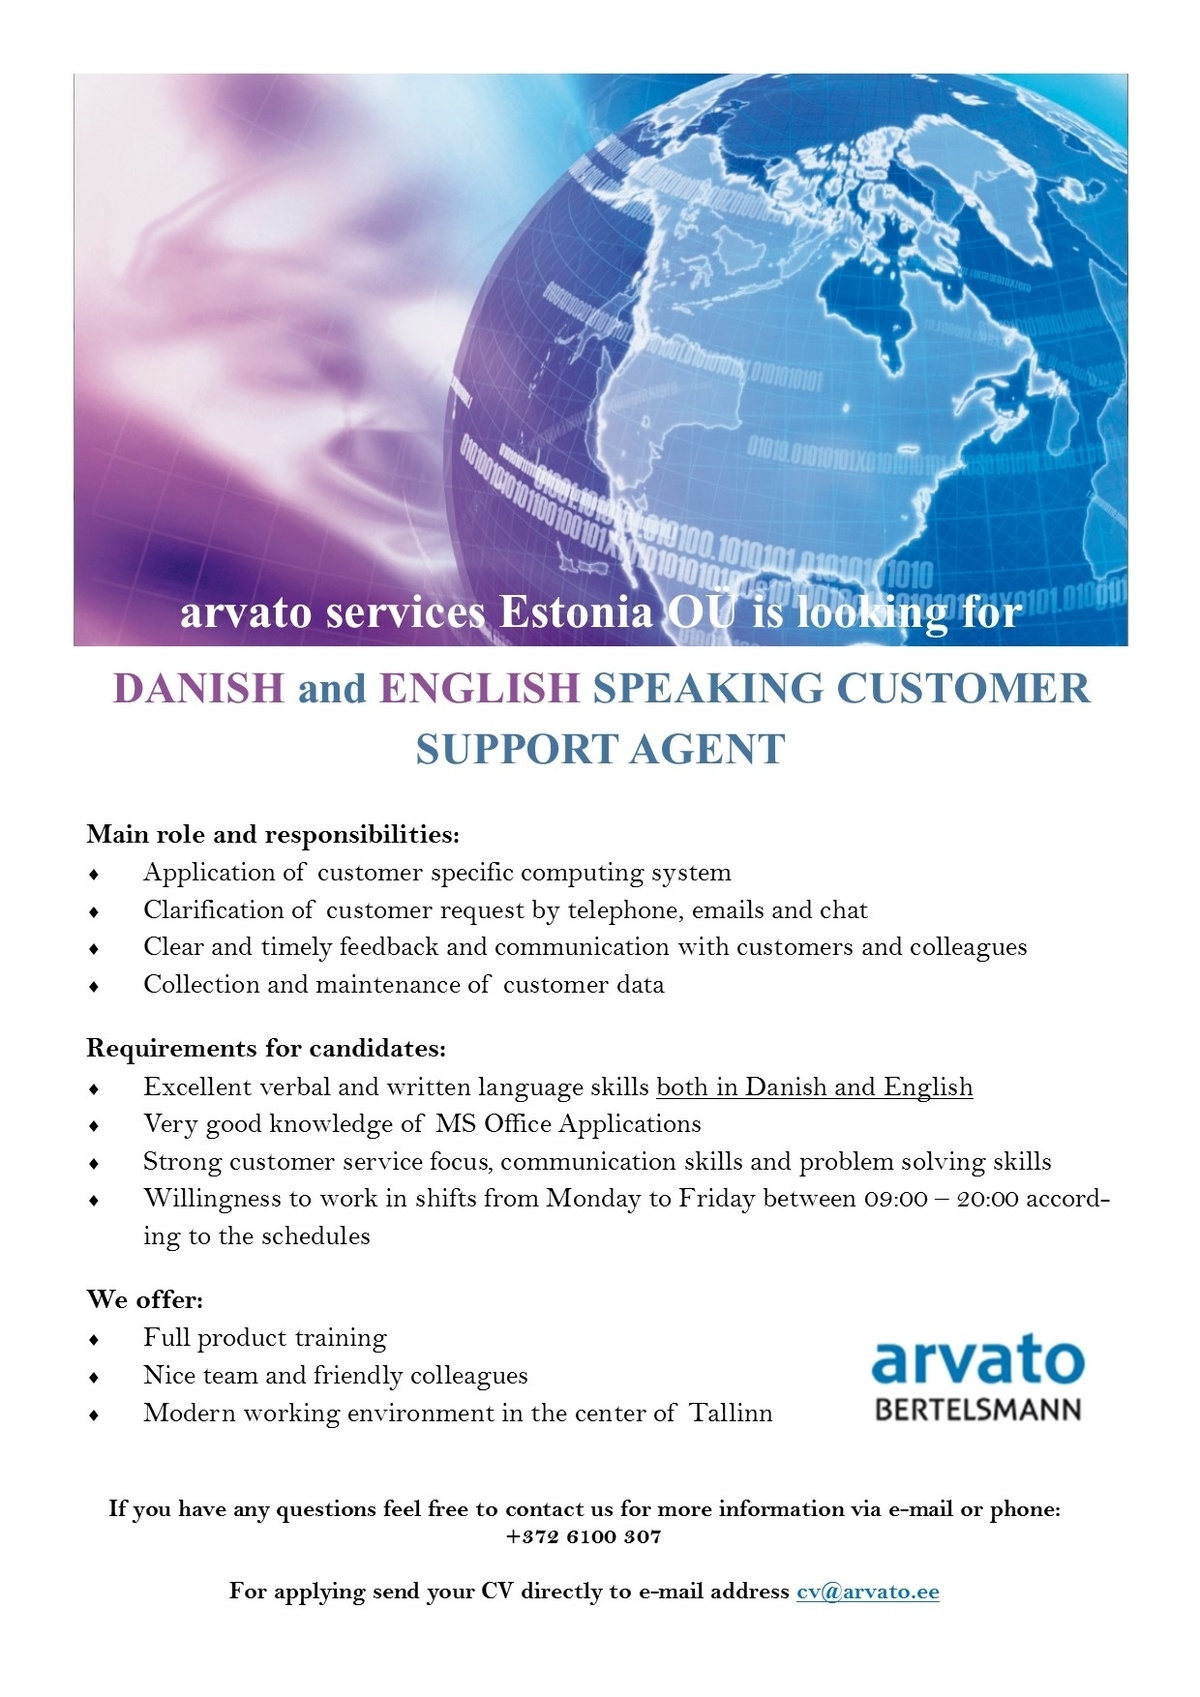 Arvato Services Estonia OÜ Danish and English speaking Customer Support Agent